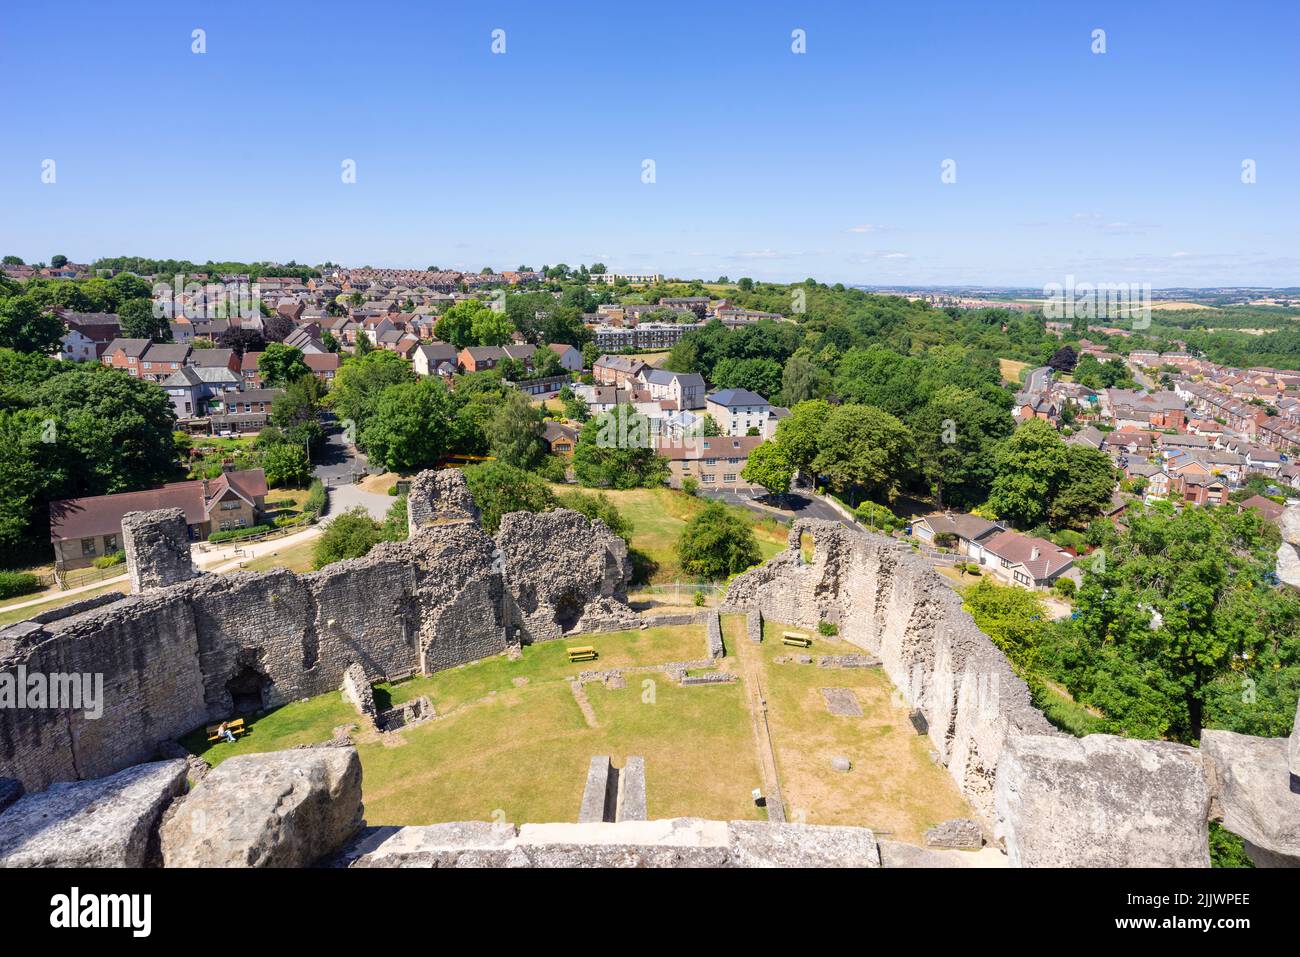 Aerial view of Conisbrough Castle ruins of Conisbrough castle Conisbrough near Doncaster South Yorkshire England Uk GB Europe Stock Photo